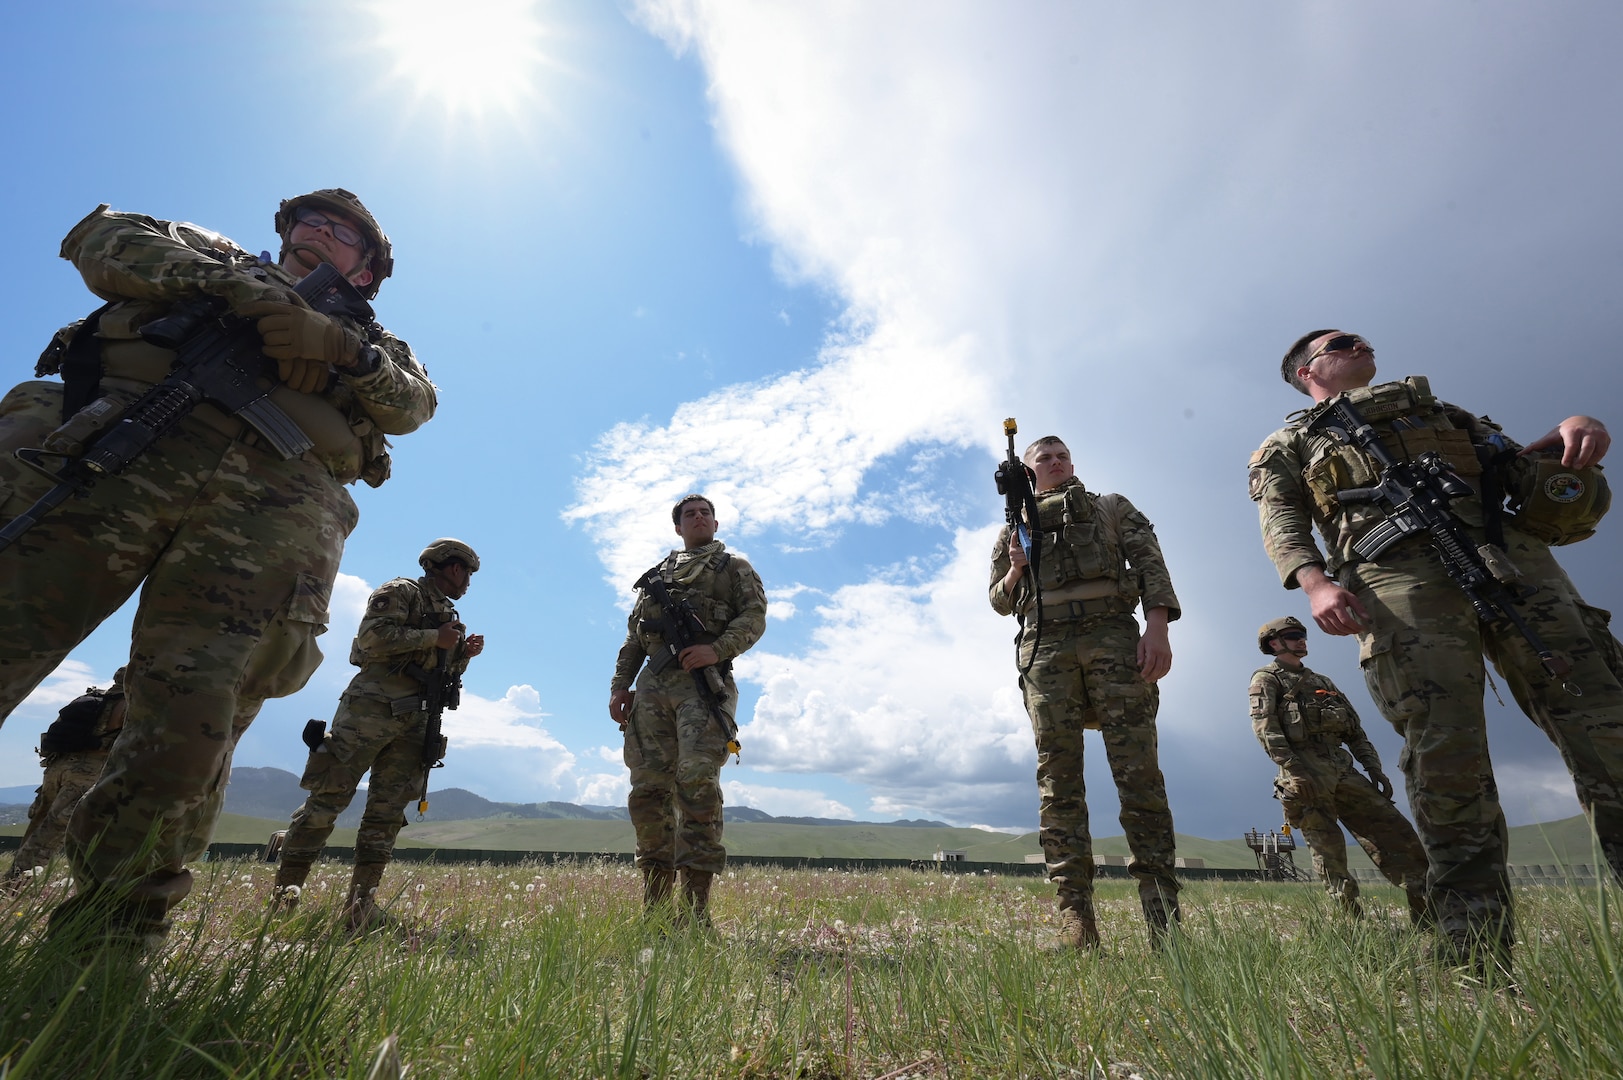 Airmen with the 841st Missile Security Forces Squadron standby for instructions from their team leader during Operation Avalanche Defender at Fort William Henry Harrison, Mont., May 31, 2023. The operation was specifically designed for the 841st MSFS, whose primary mission is to recapture and recover launch facilities spread far and spanning Montana.